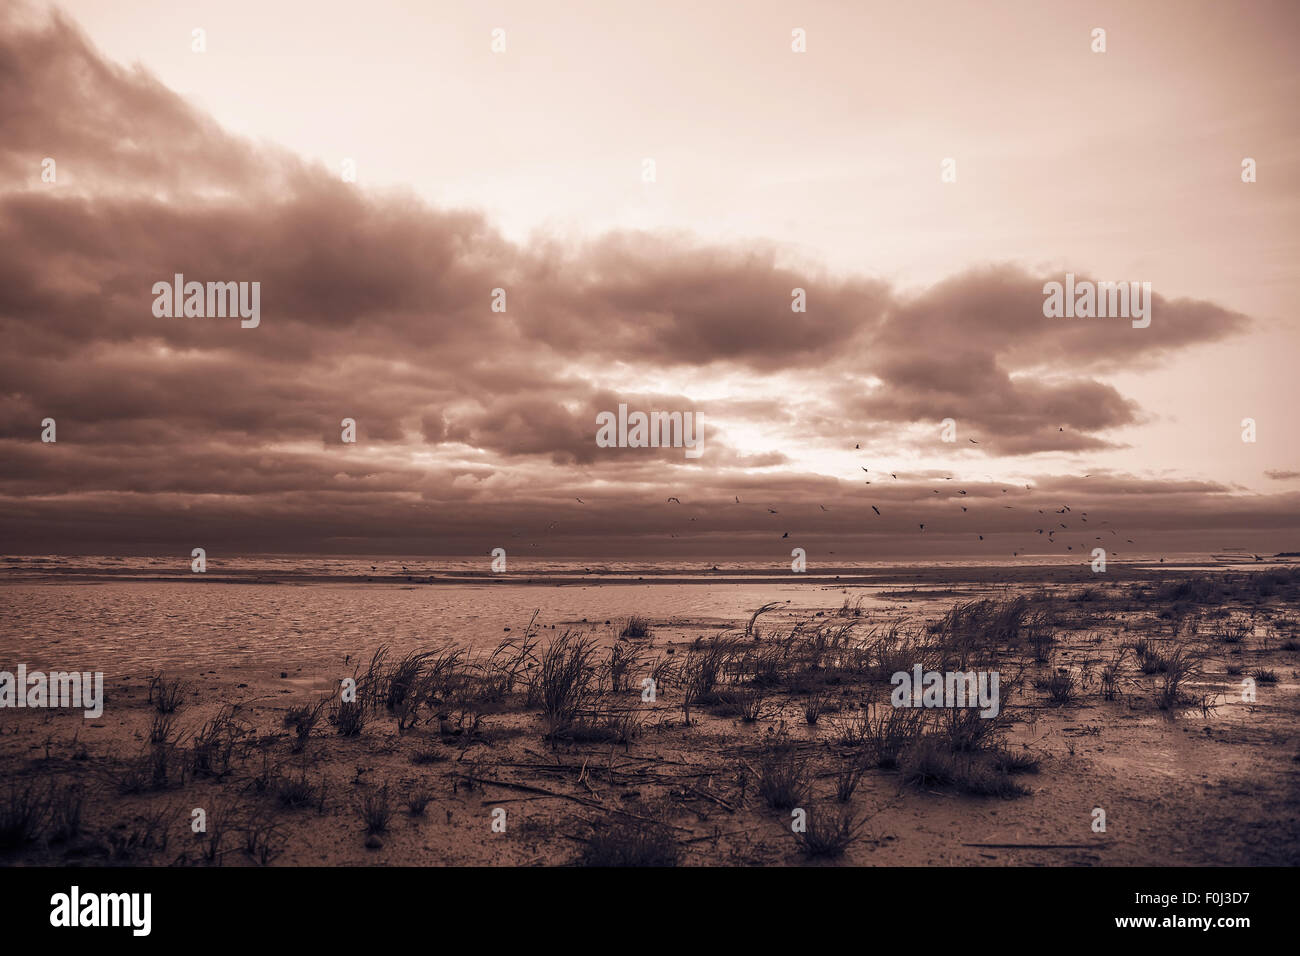 Cloudy sky and flock of seagulls over the Ladoga lake. Leningrad region, Russia. Stock Photo